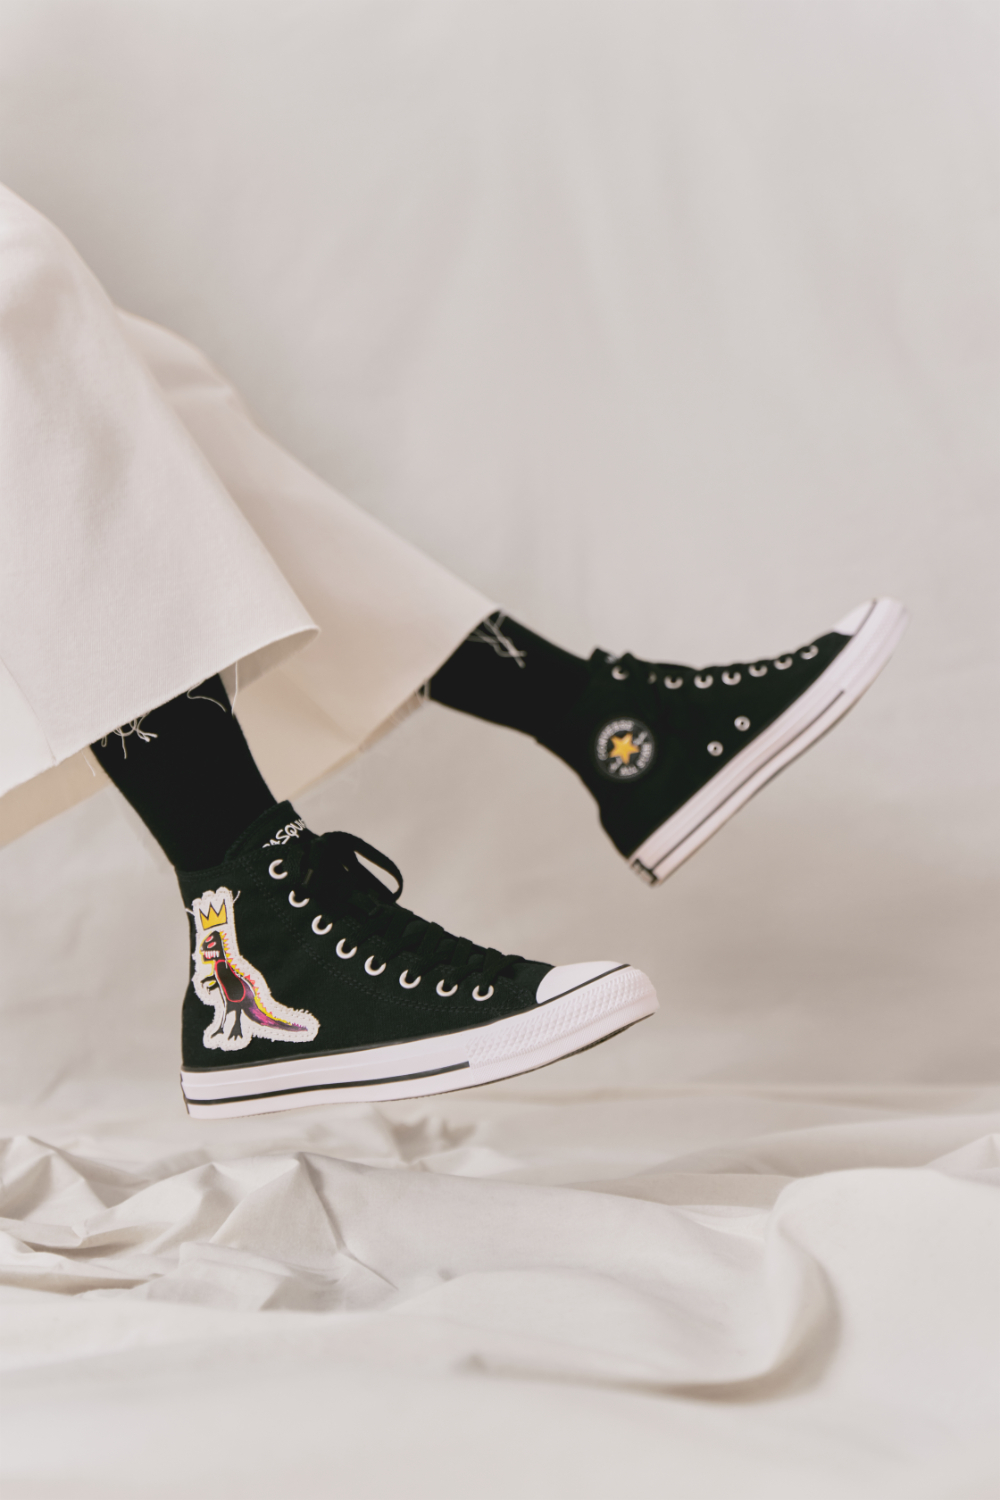 Converse Celebrates Jean-Michel Basquiat’s Legacy for Latest Collection